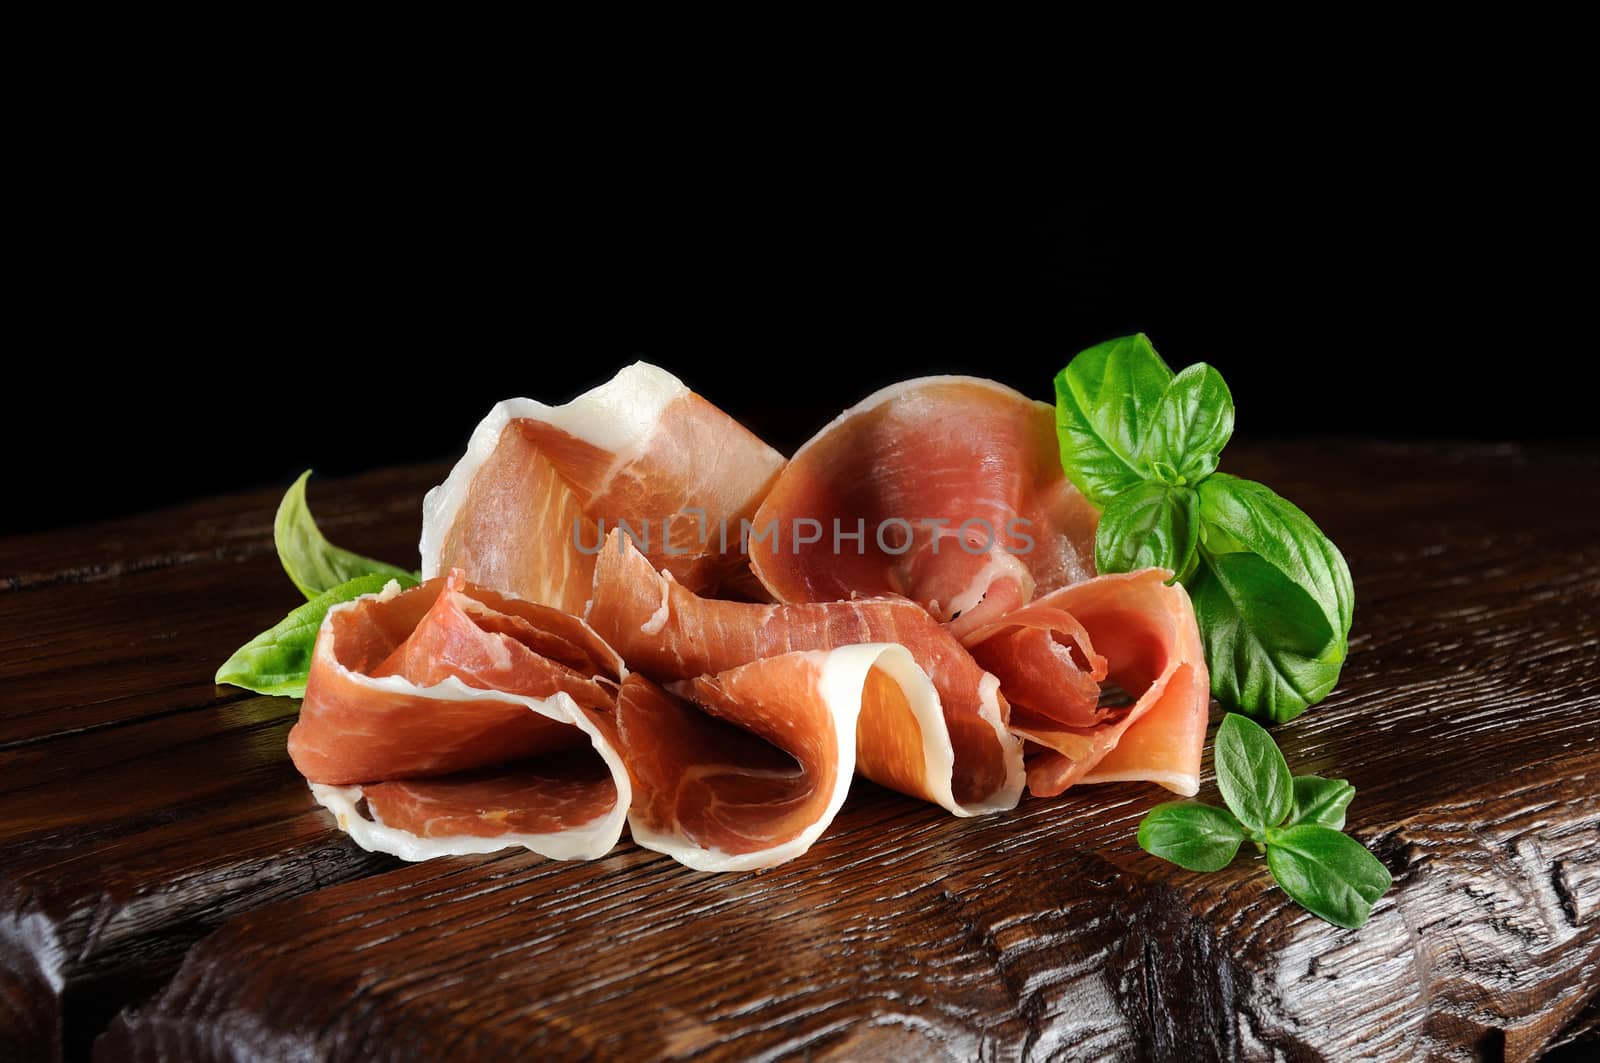 parma ham (jamon) sliced and basil on a wooden board.